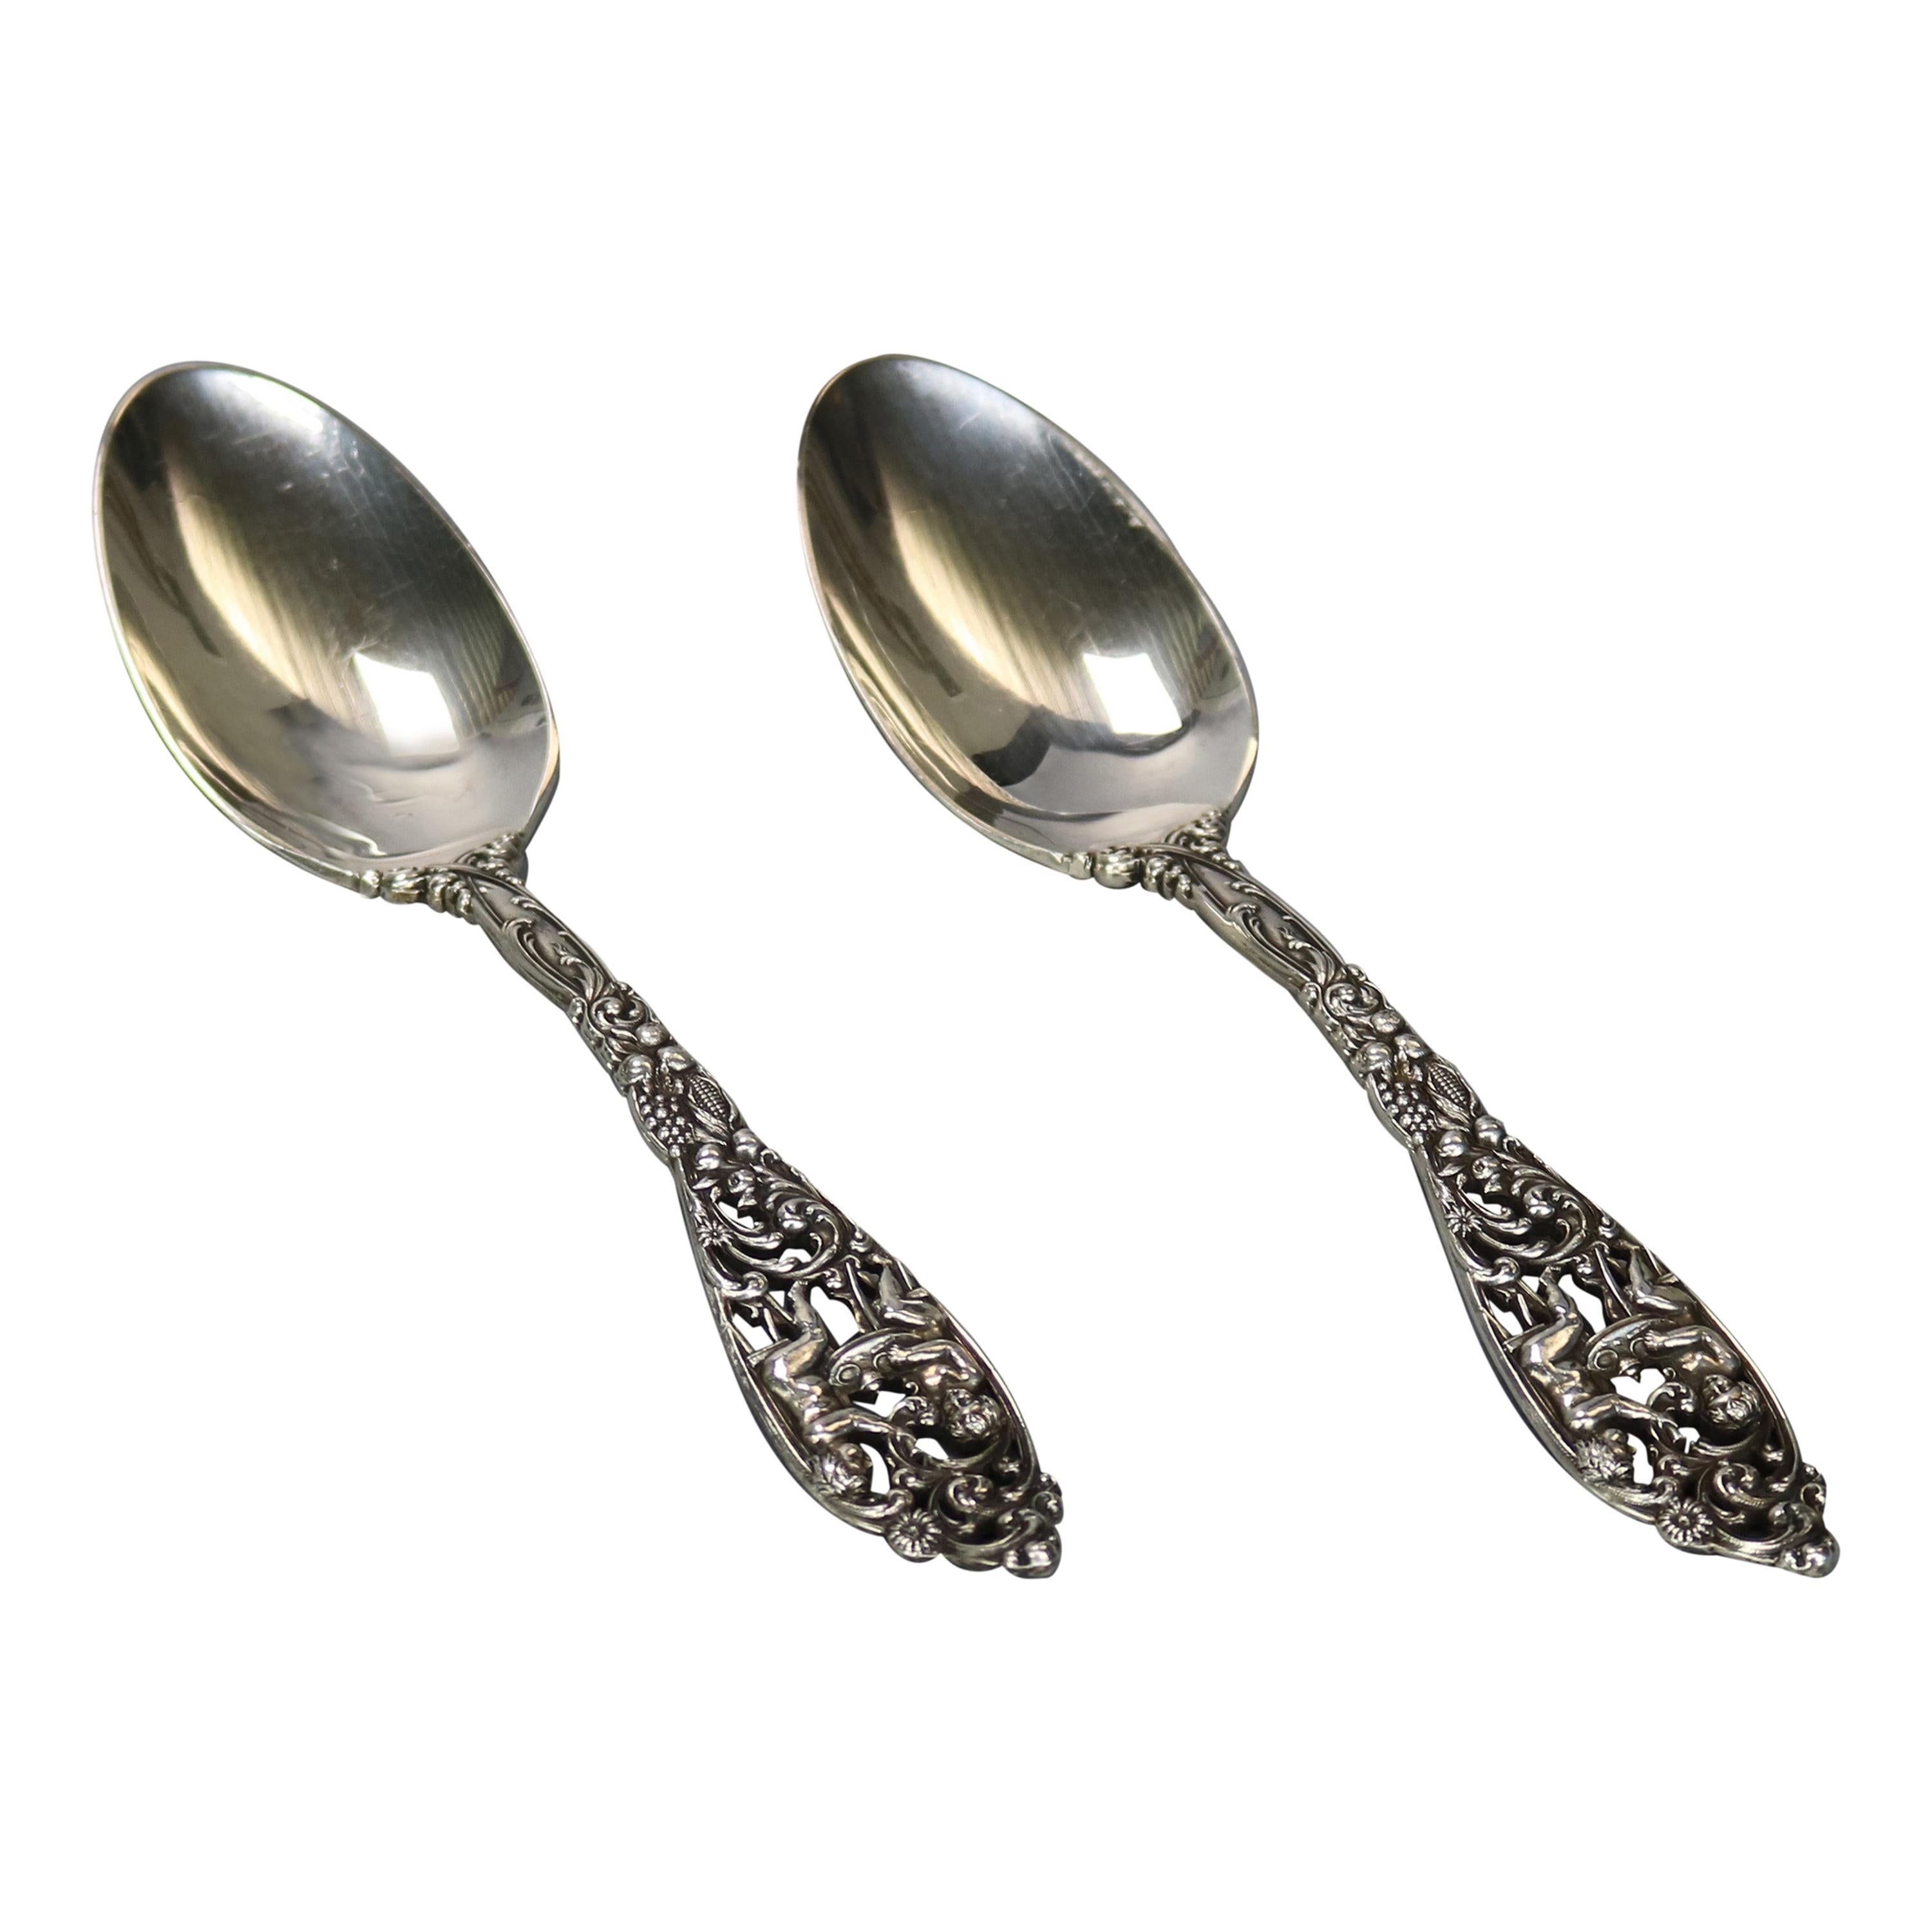 Pair Sterling Silver "Labors of Cupid" Serving Spoons by Dominick & Haff, c1890